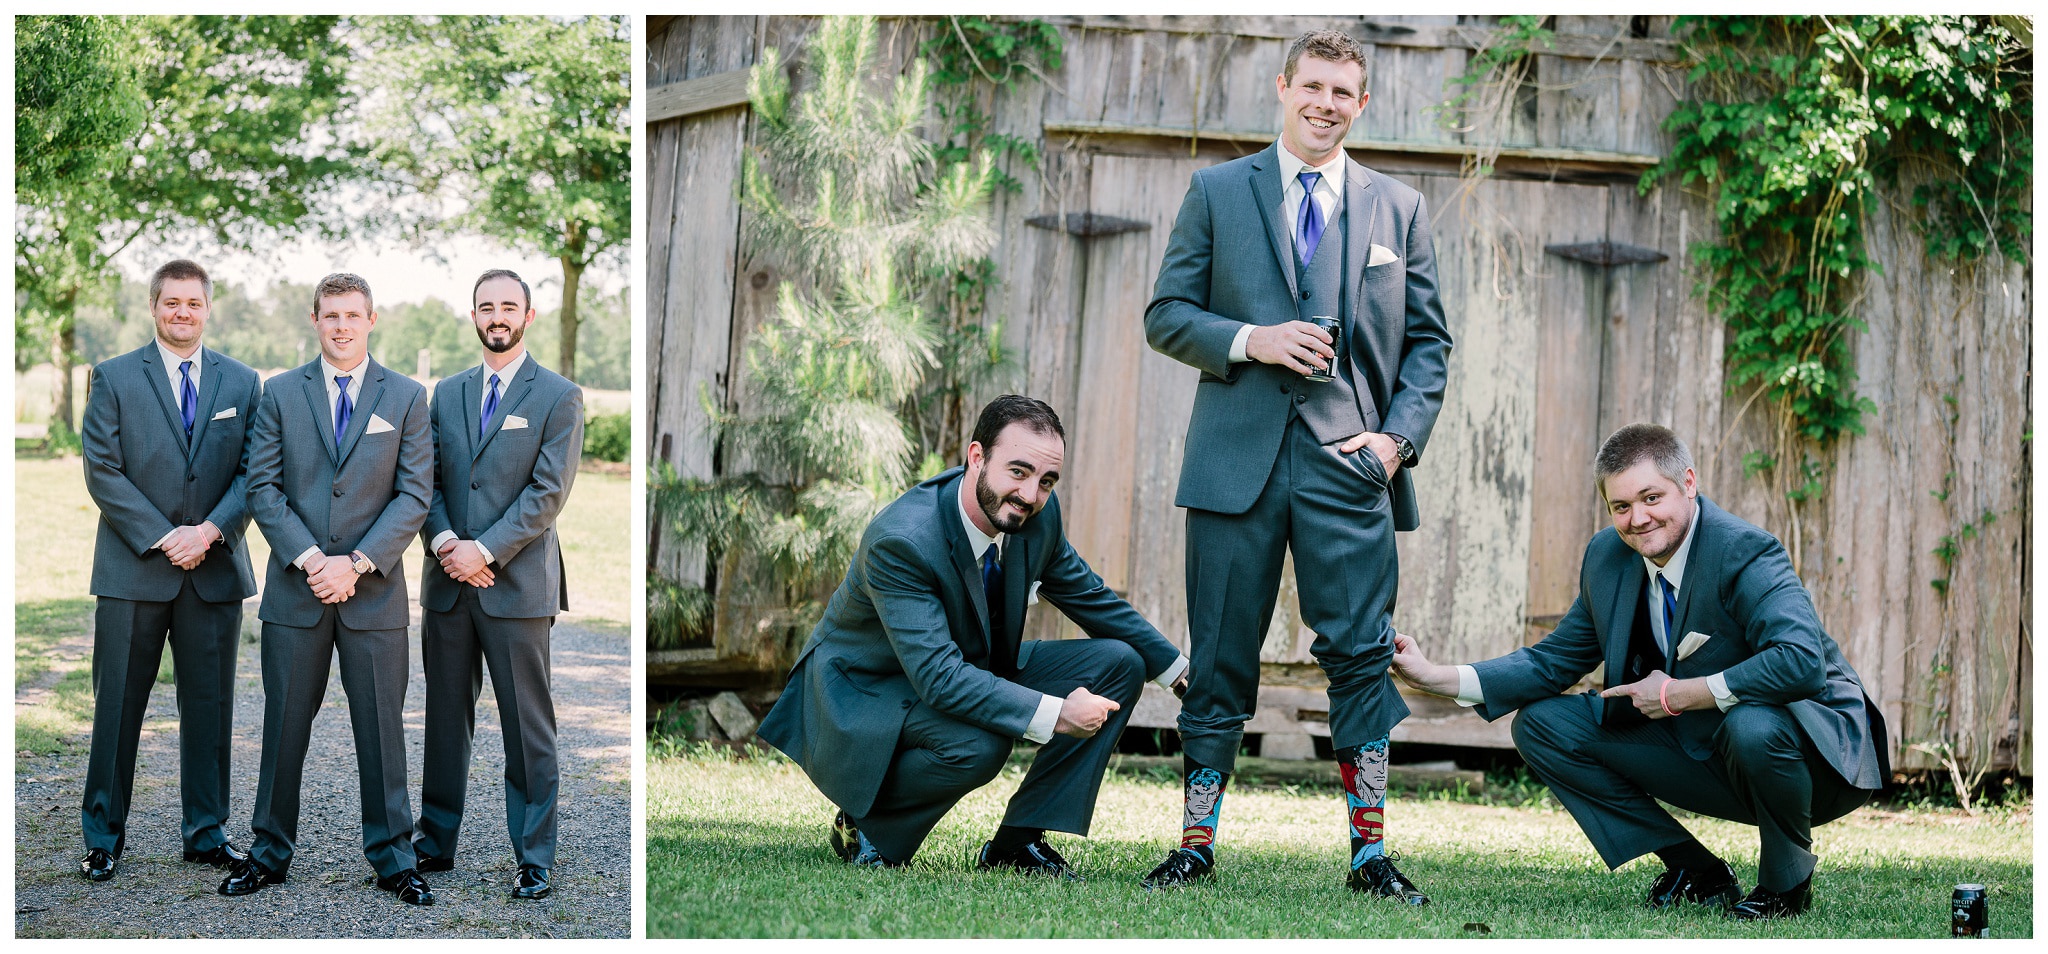 The Groomsmen and the Groom showing of his superman socks